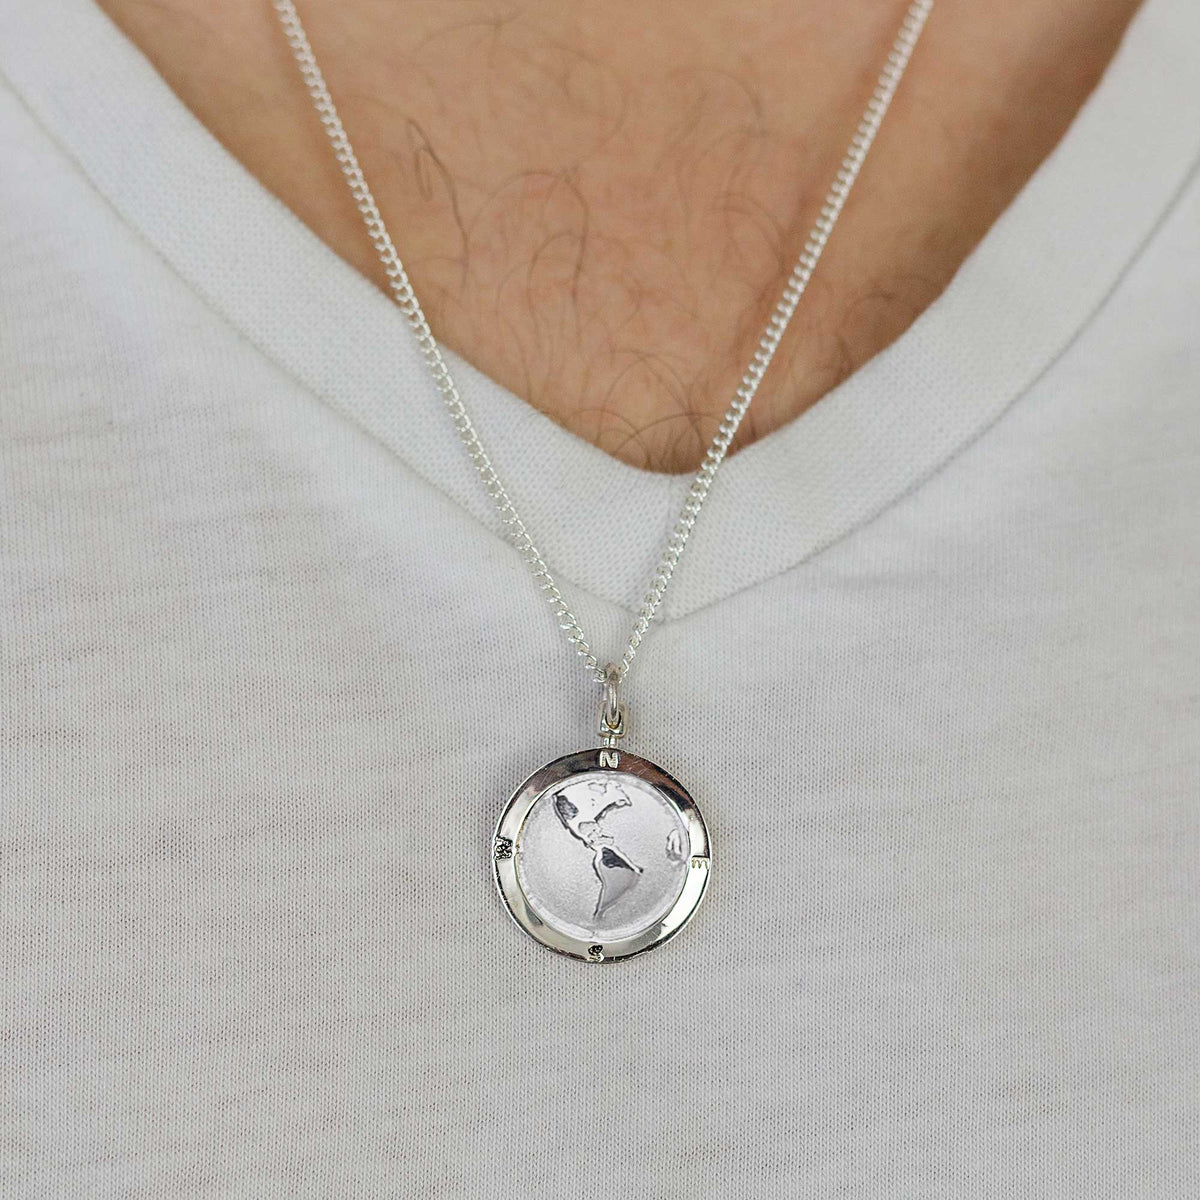 USA south america map globe pendant necklace solid silver mans travel gift emigration